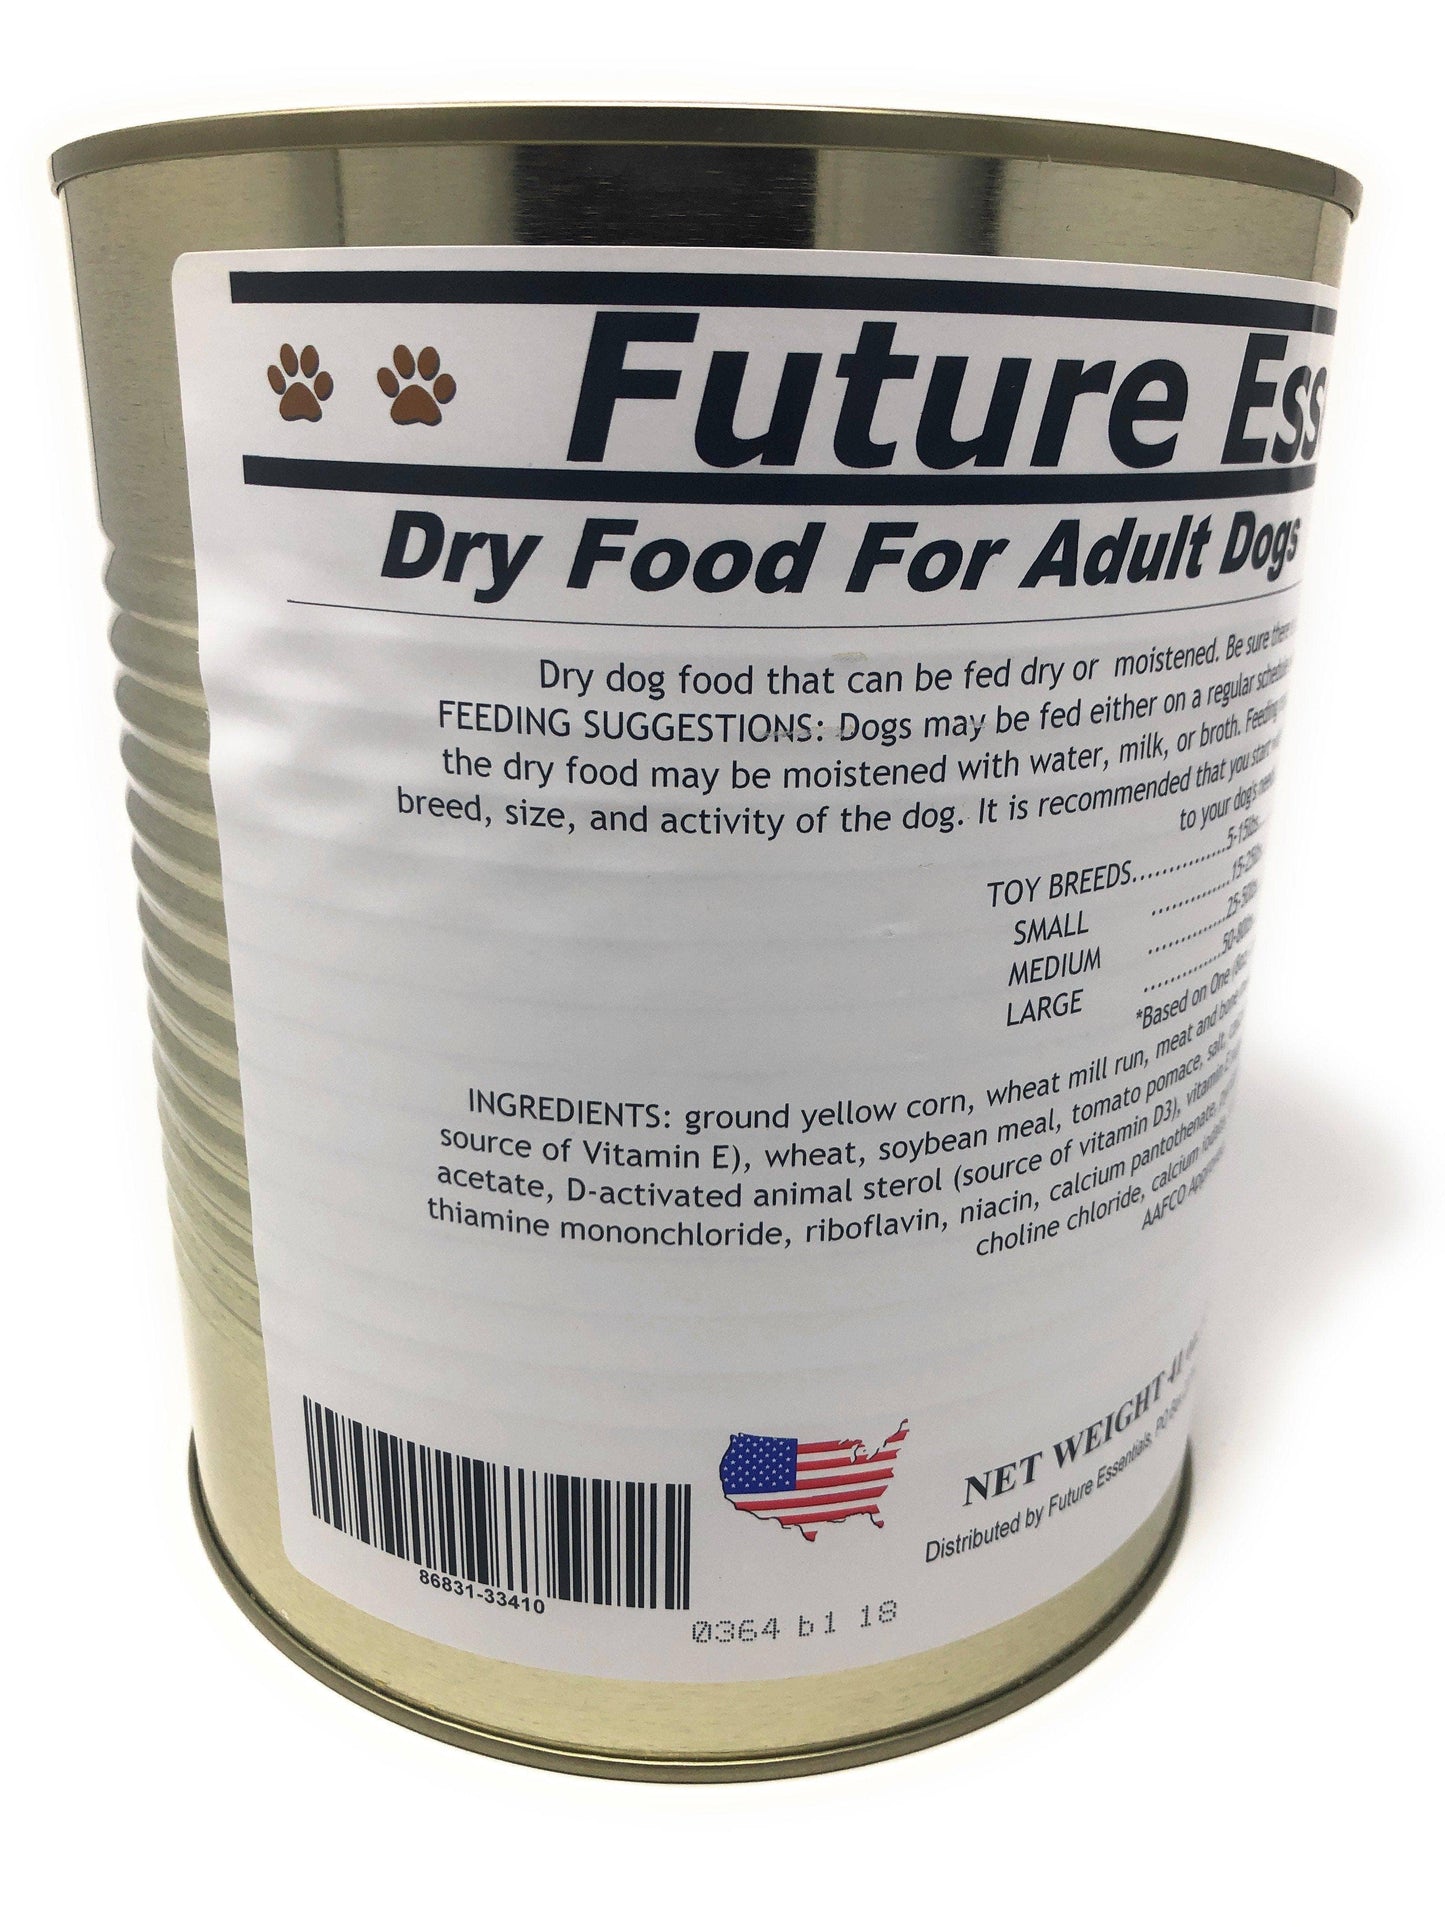 Future Essentials Dry Dog Food 6 cans